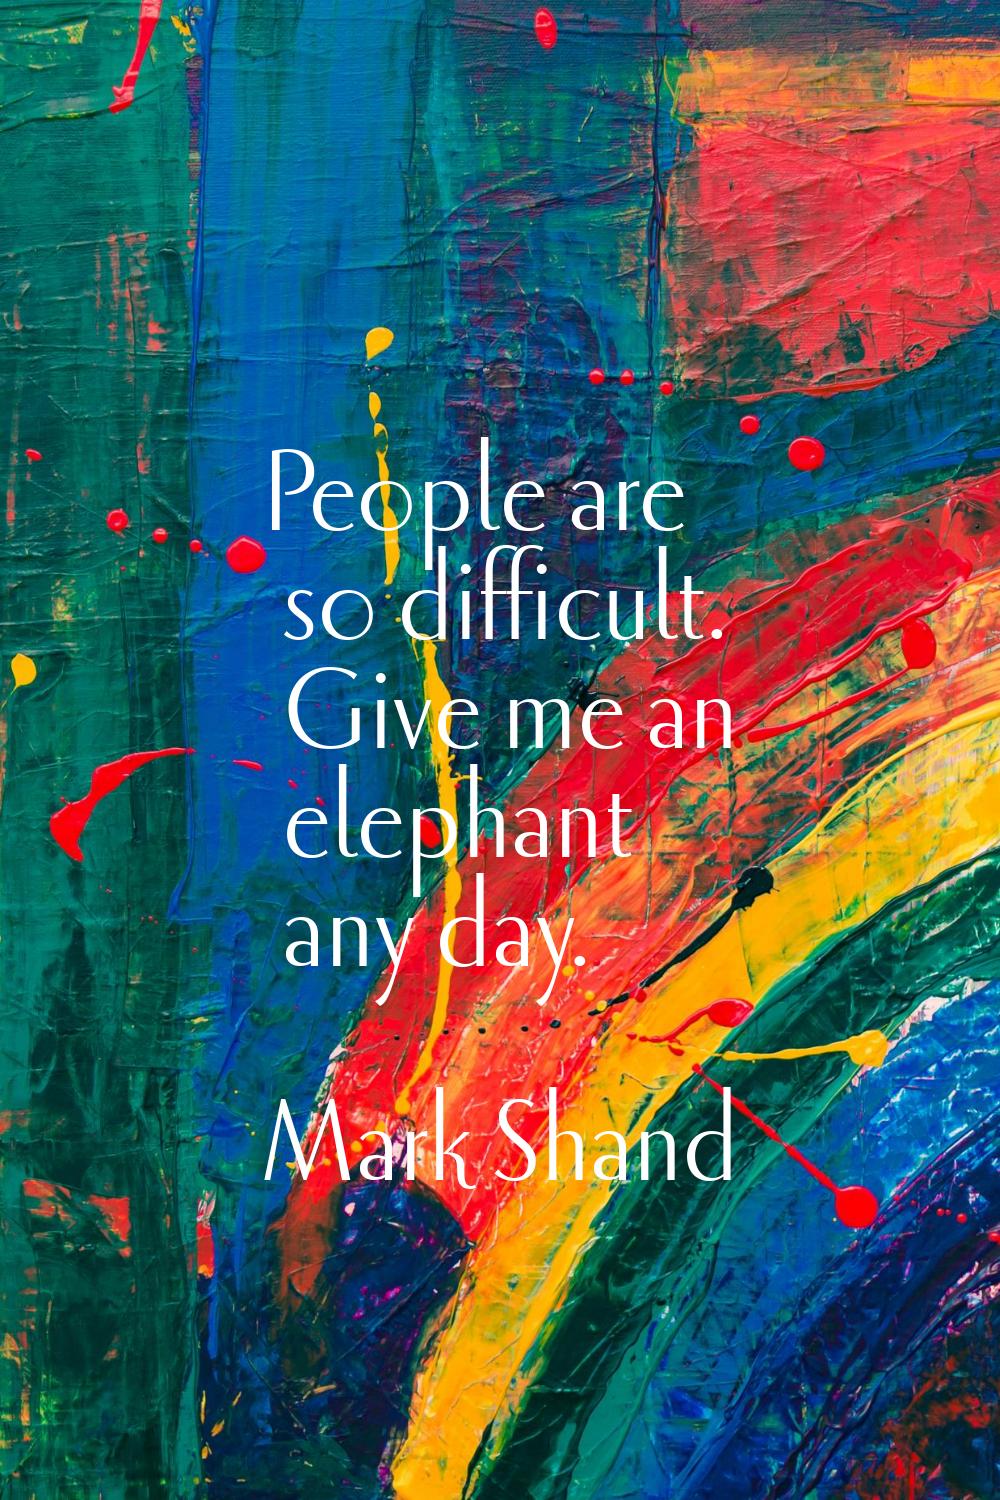 People are so difficult. Give me an elephant any day.